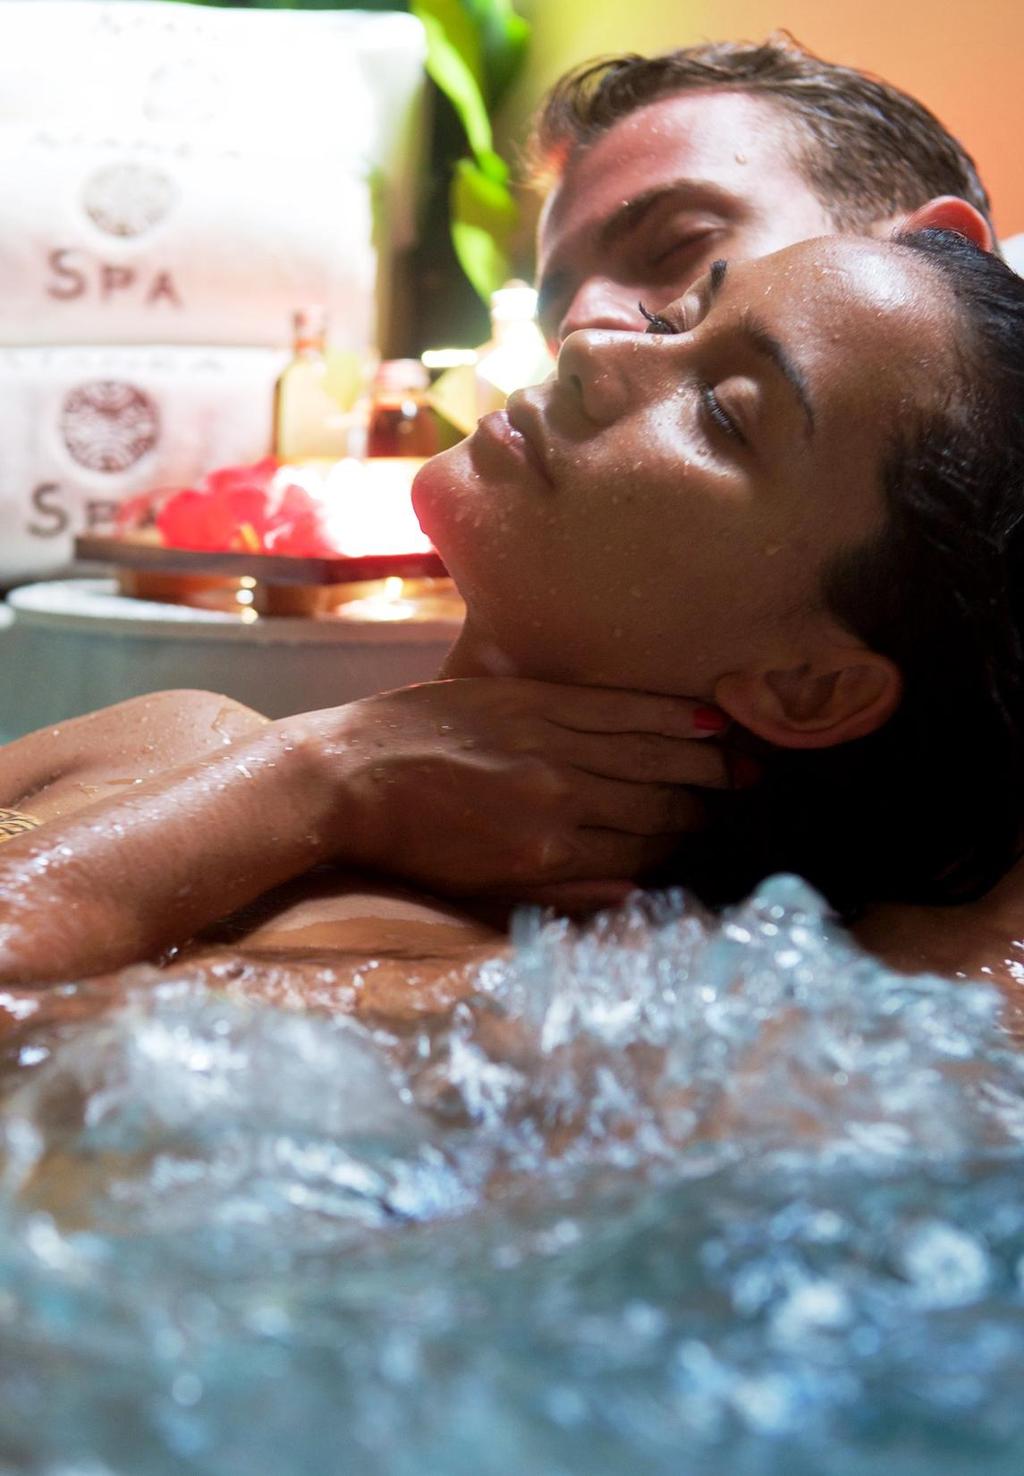 The spa strives to offer the best overall well-being and relaxation, and is unique to Tahiti because it takes advantage of the natural environment of the island while still embracing the Tahitian